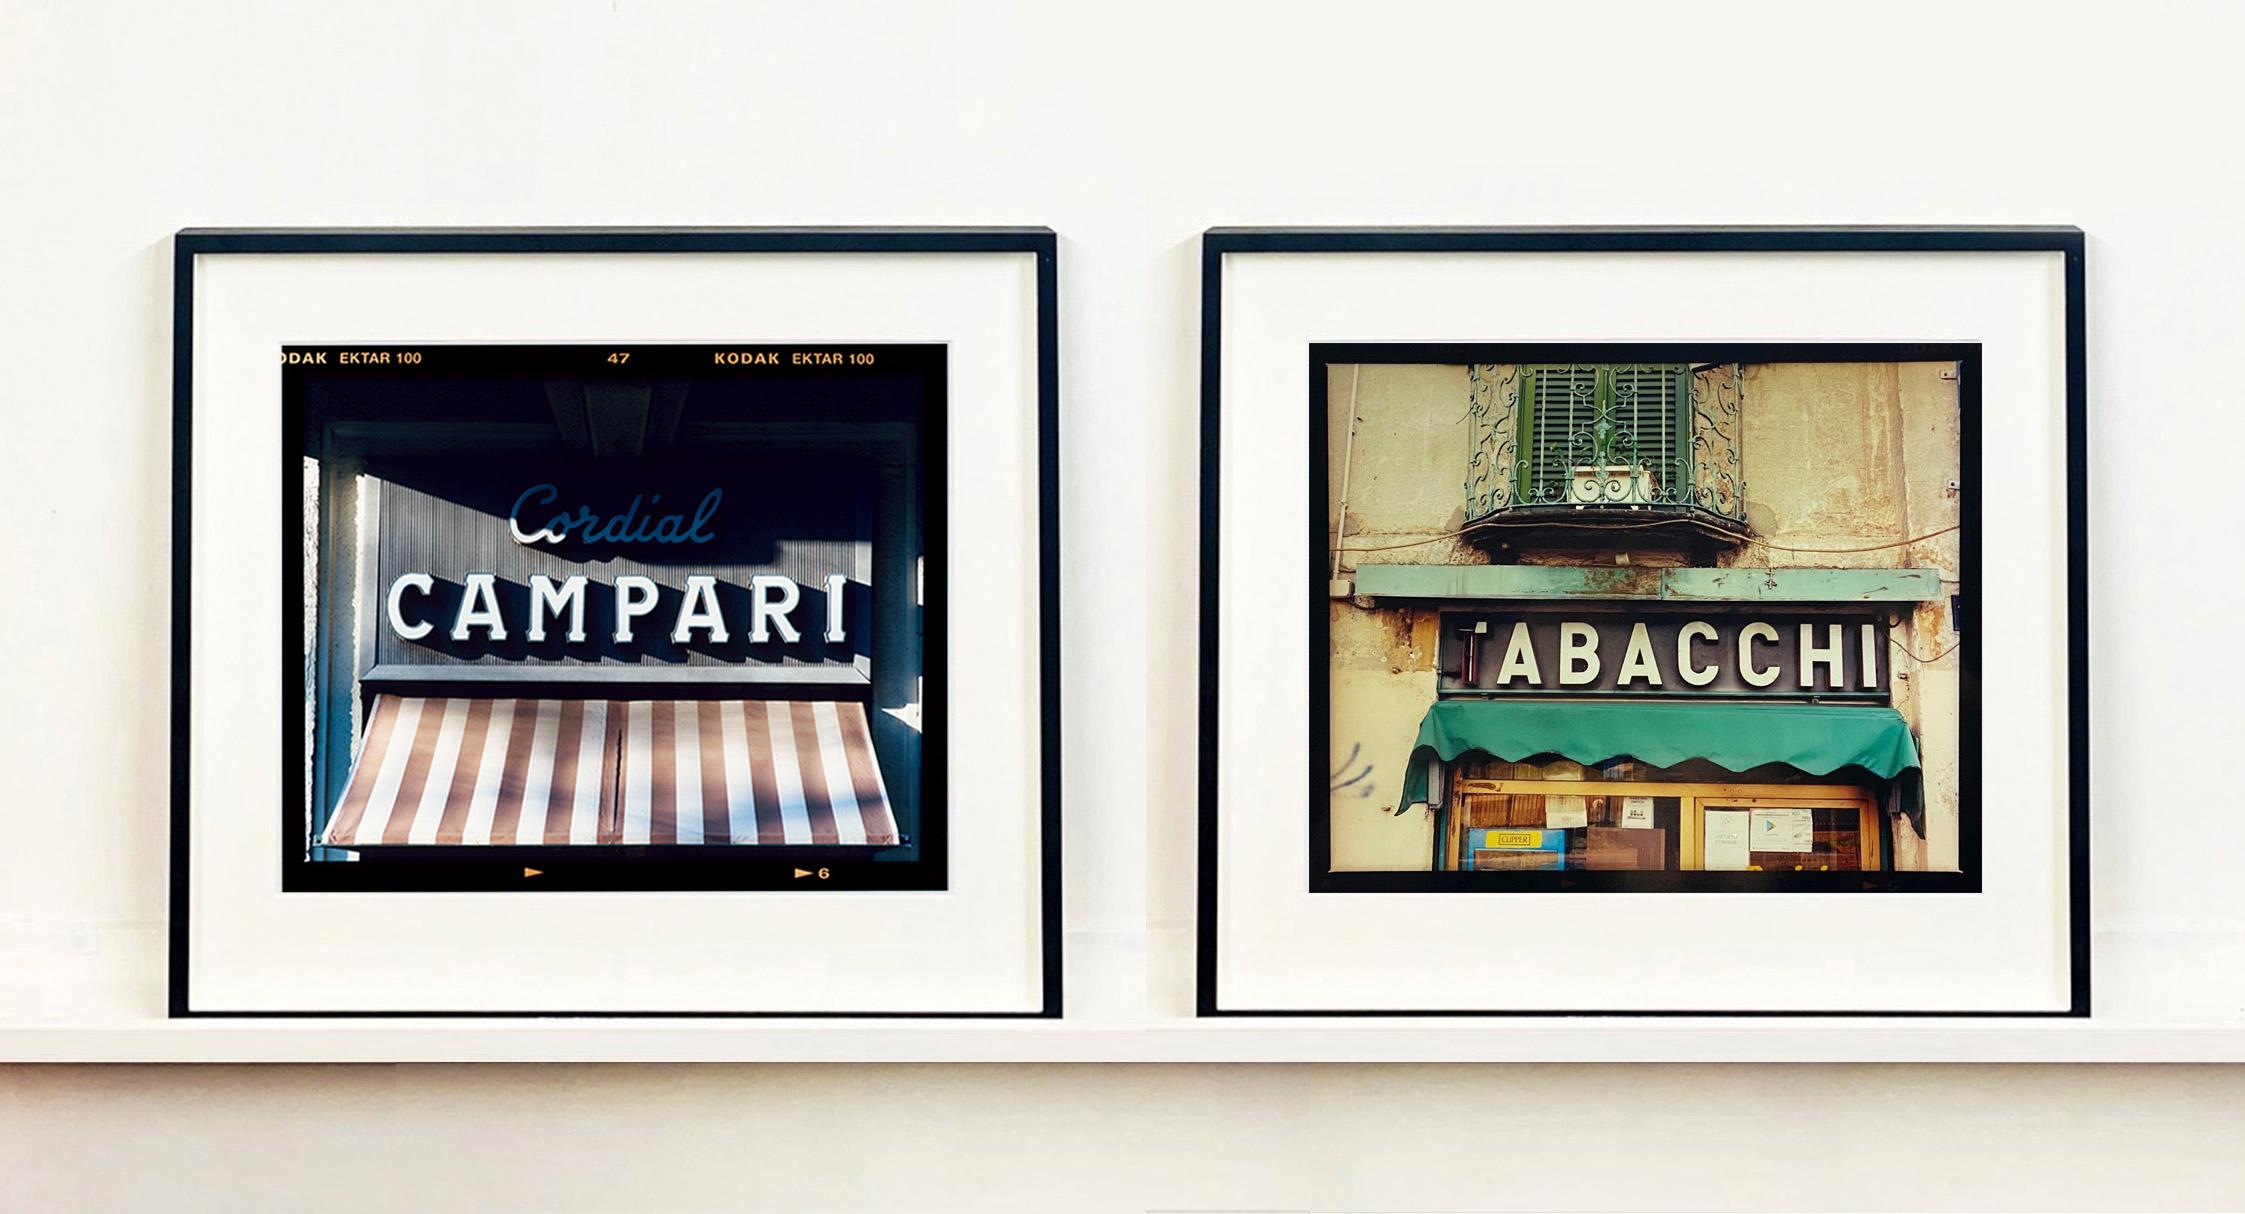 TABACCHI Sign, Milan - Architectural Color Photography For Sale 5